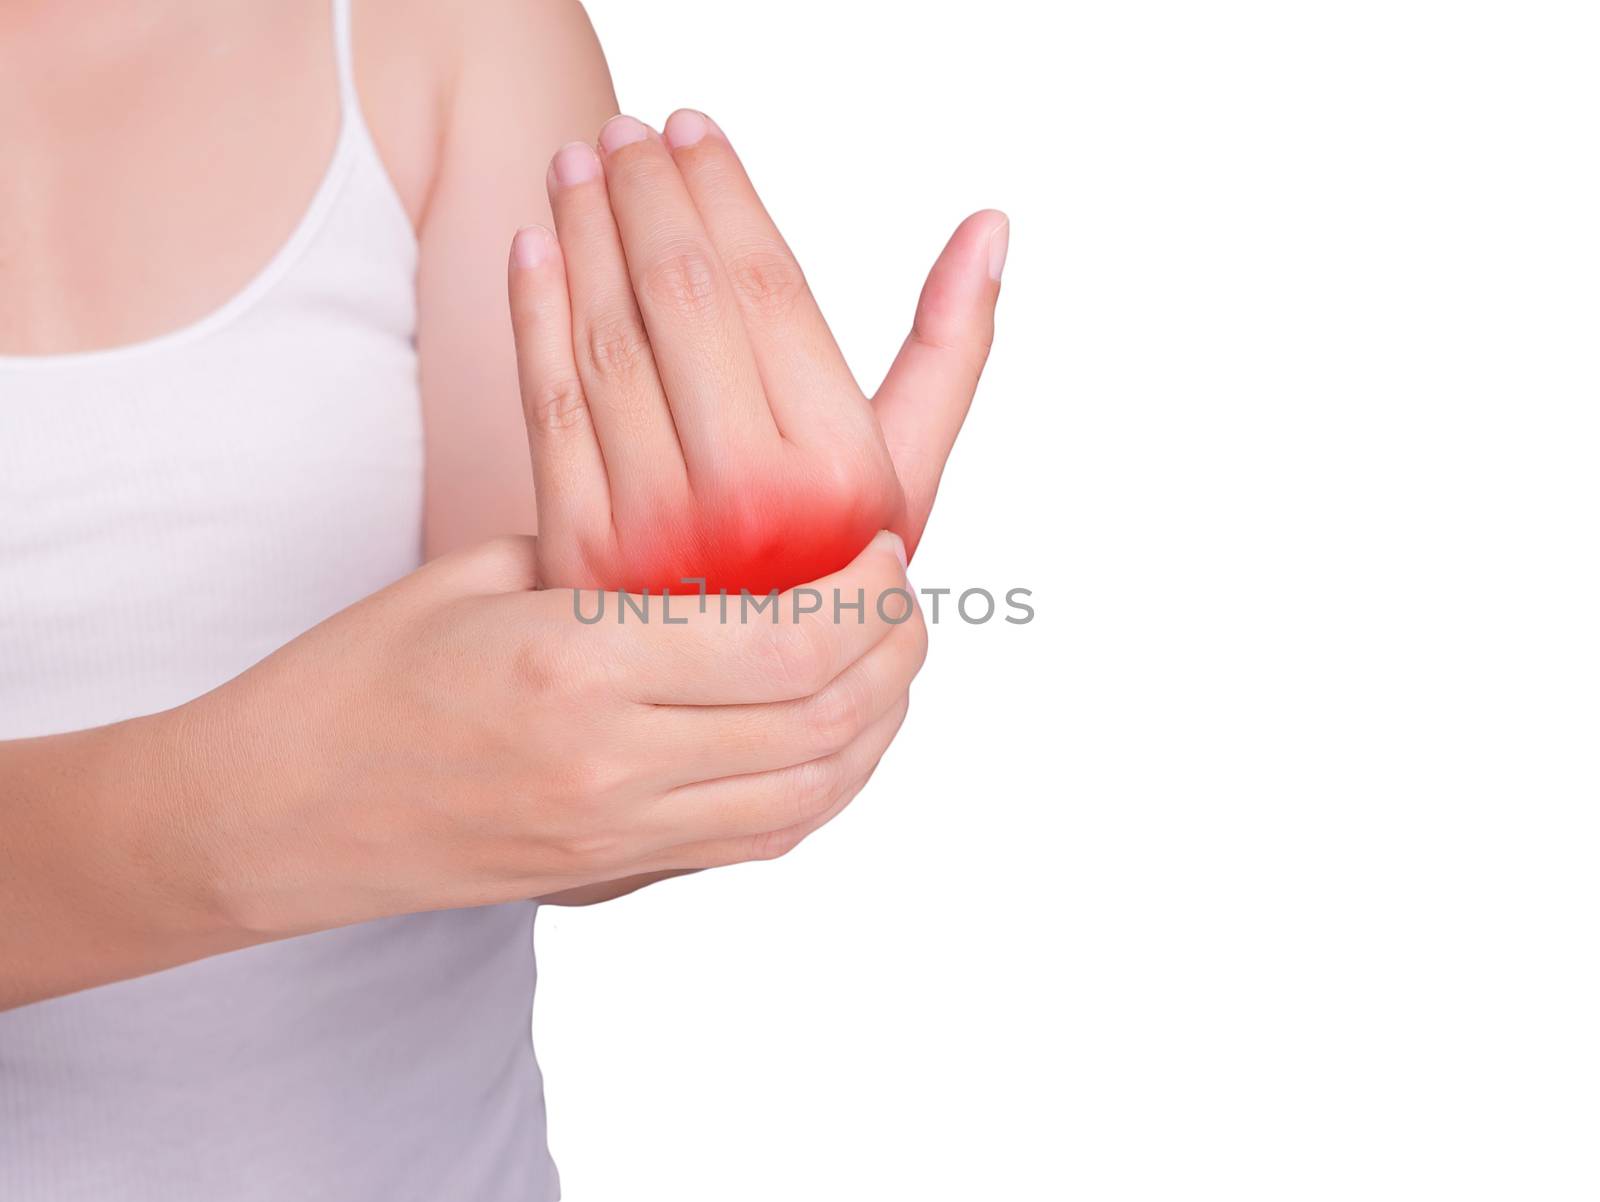 woman suffering from pain in hand. red color highlight at hand isolated on white background. health care and medical concept, studio shot